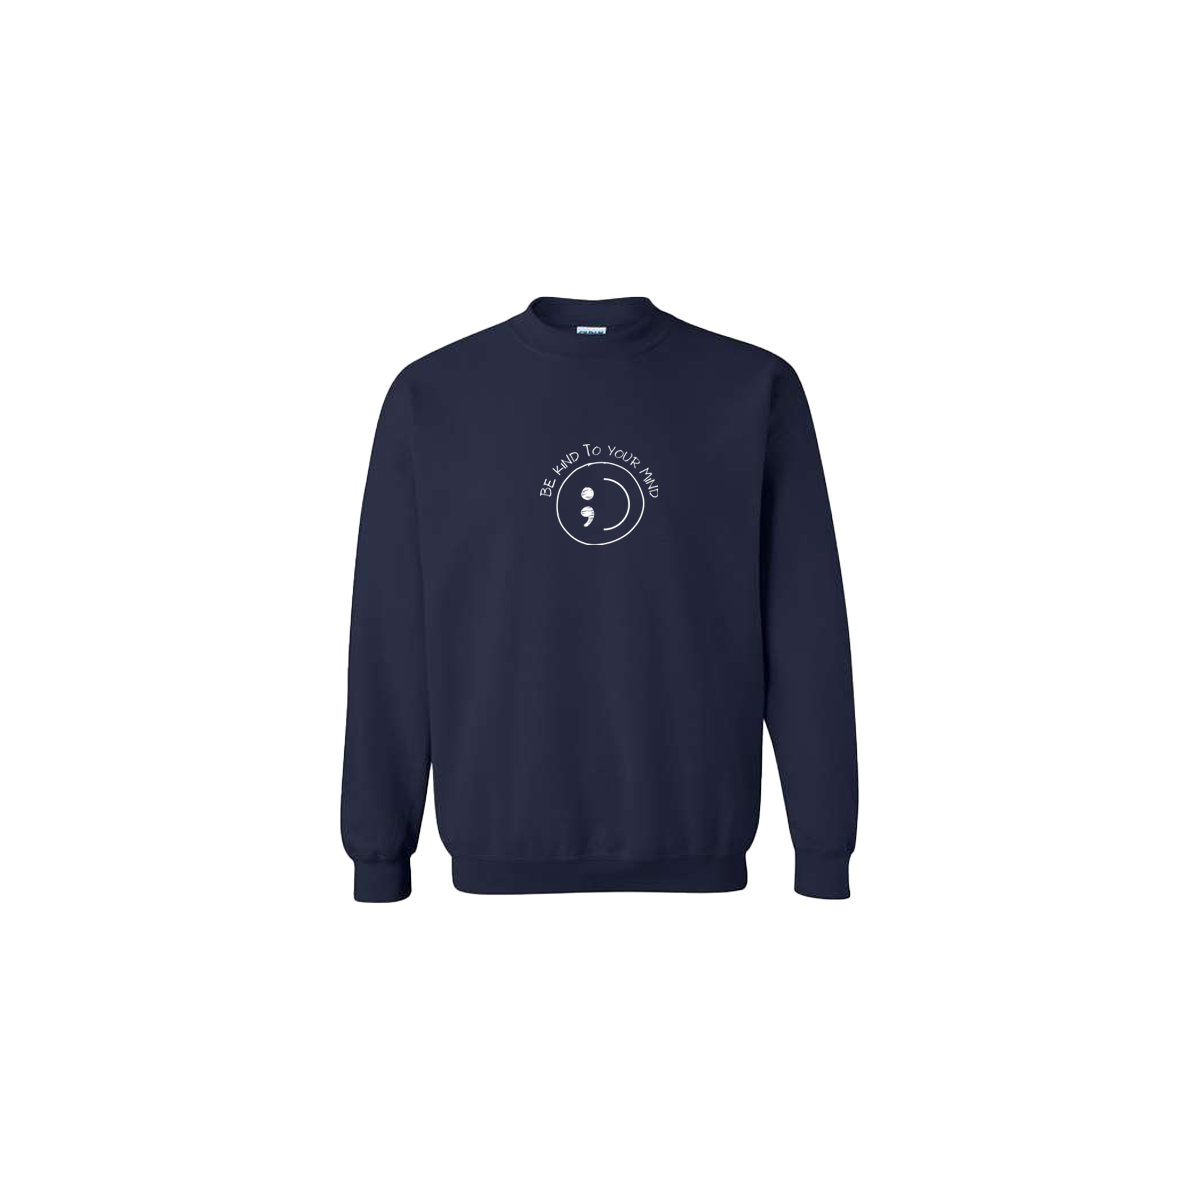 Be Kind To Your Mind Smiley Face Embroidered Navy Blue Crewneck - Mental Health Awareness Clothing